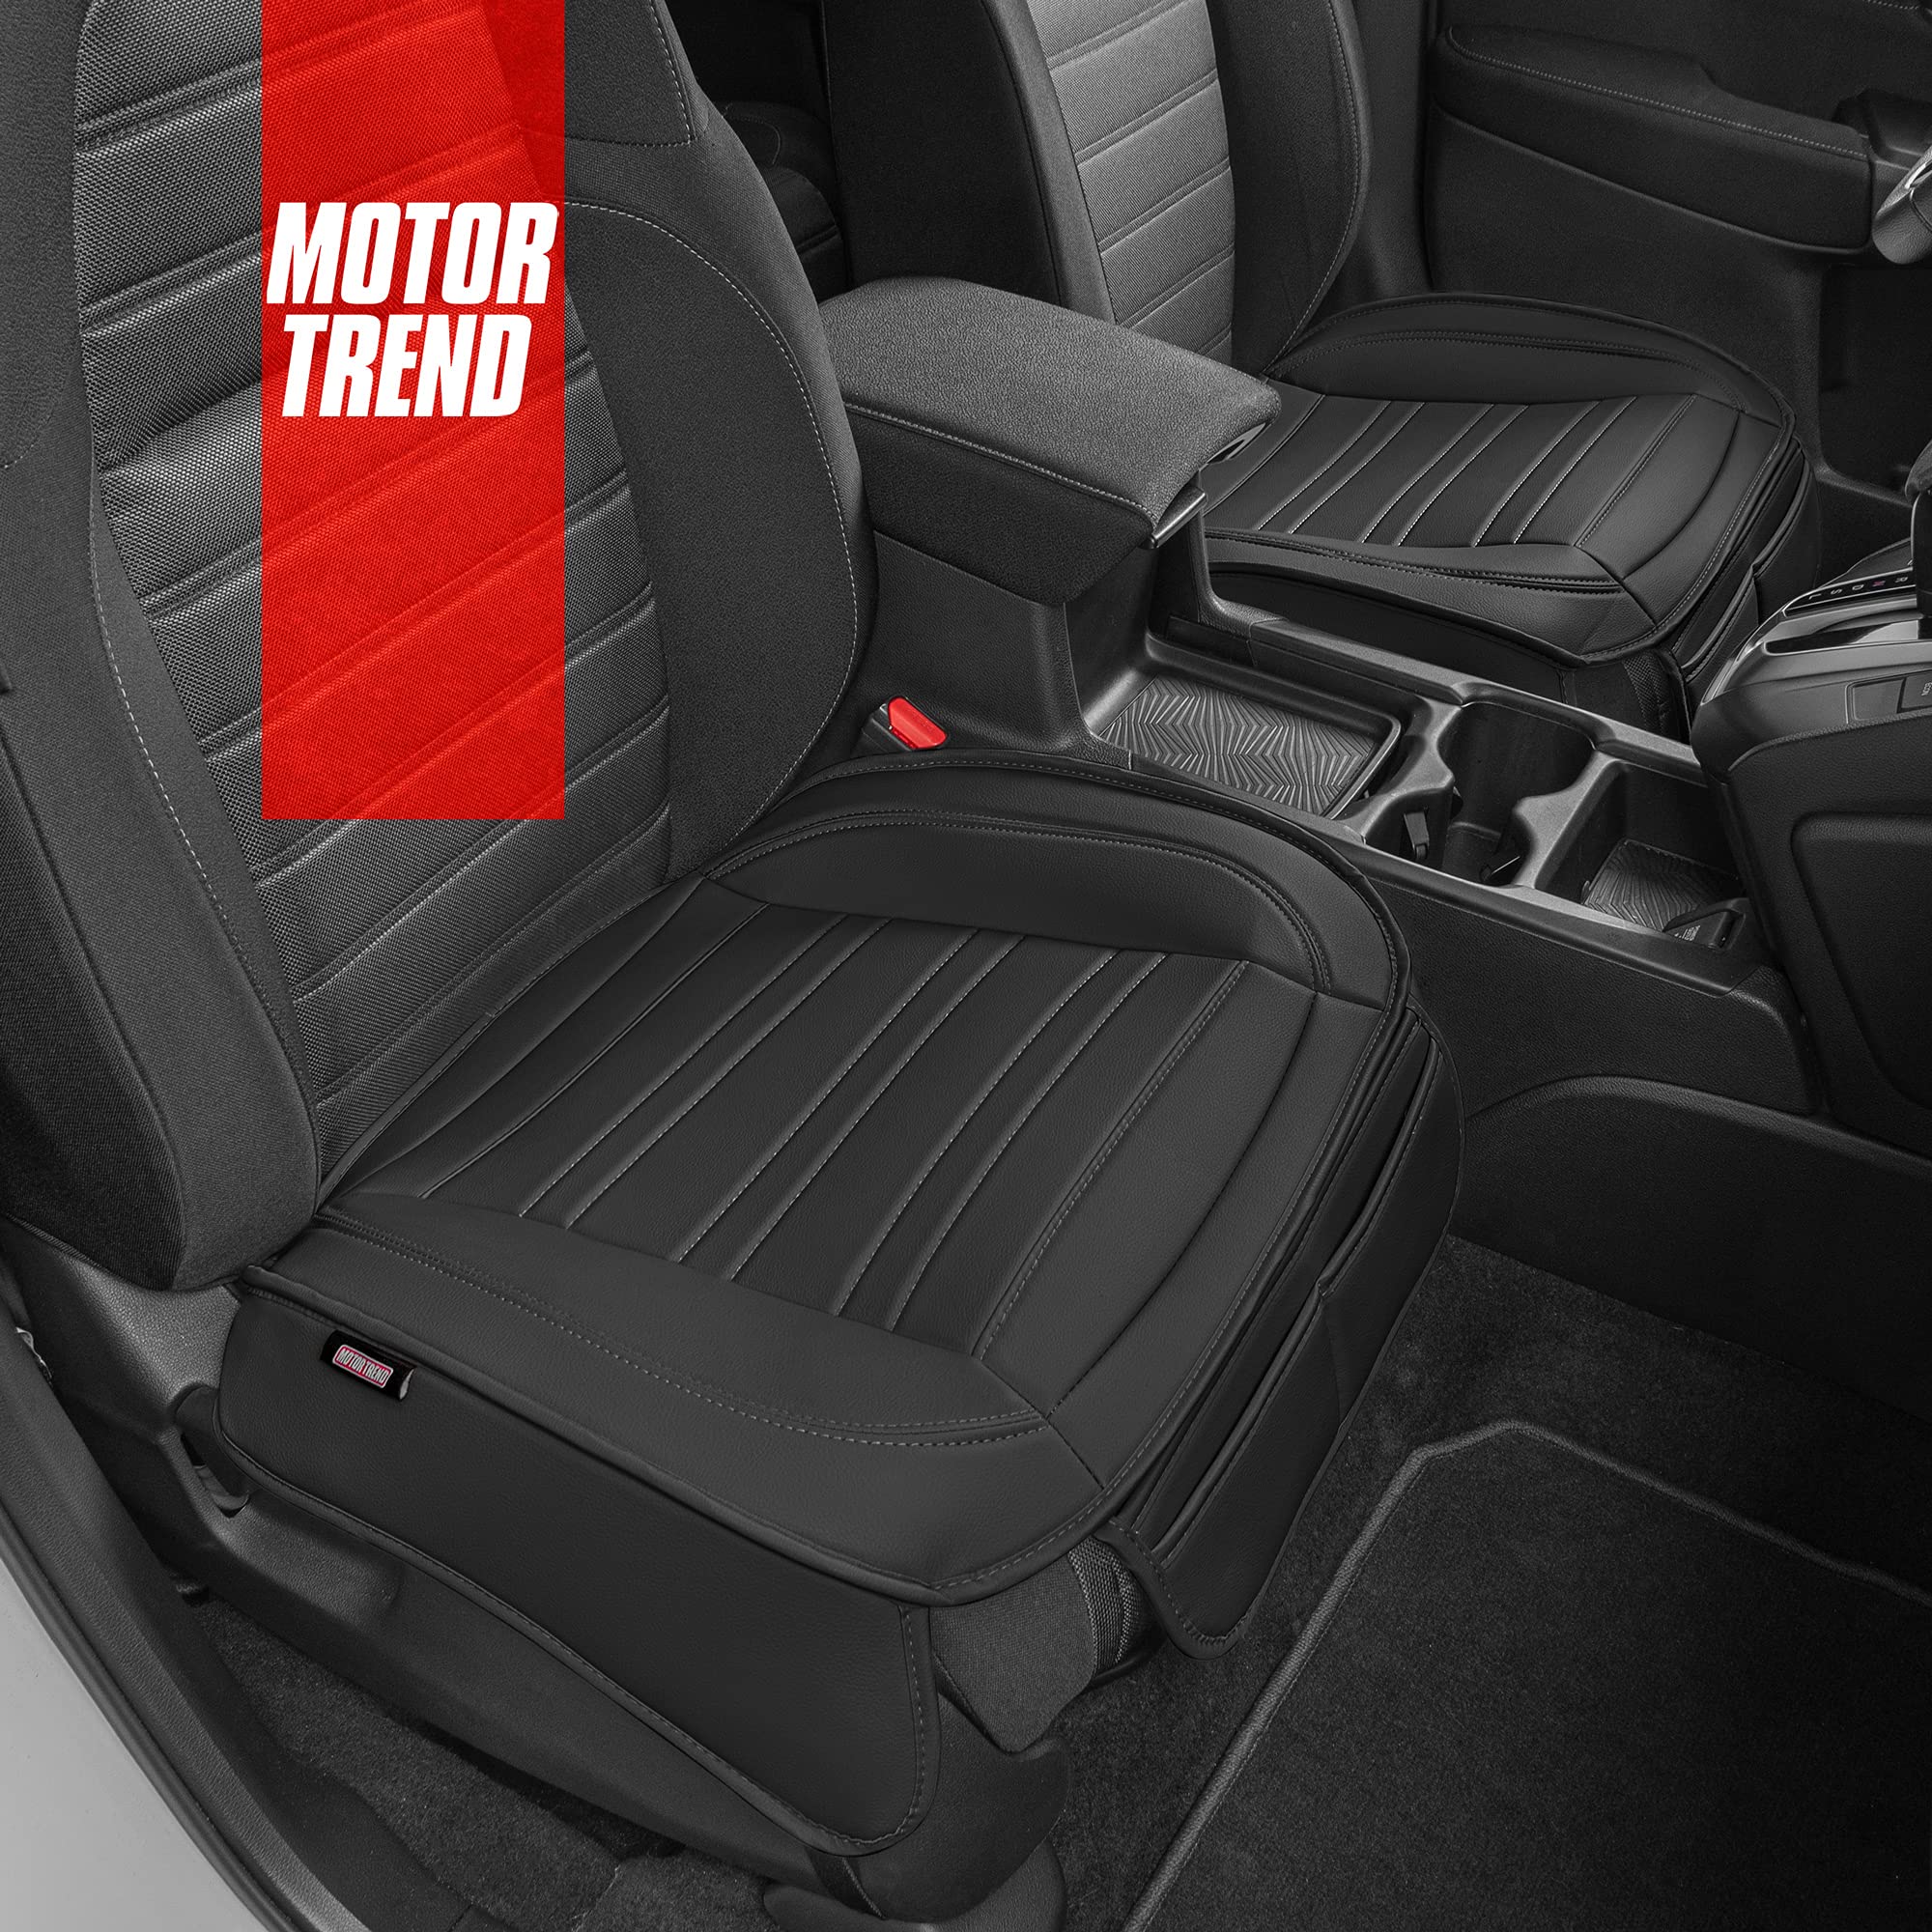 Motor Trend Seat Covers for Cars Trucks SUV, Faux Leather 2-Pack Black Padded Car Seat Covers with Storage Pockets, Premium Interior Car Seat Cover